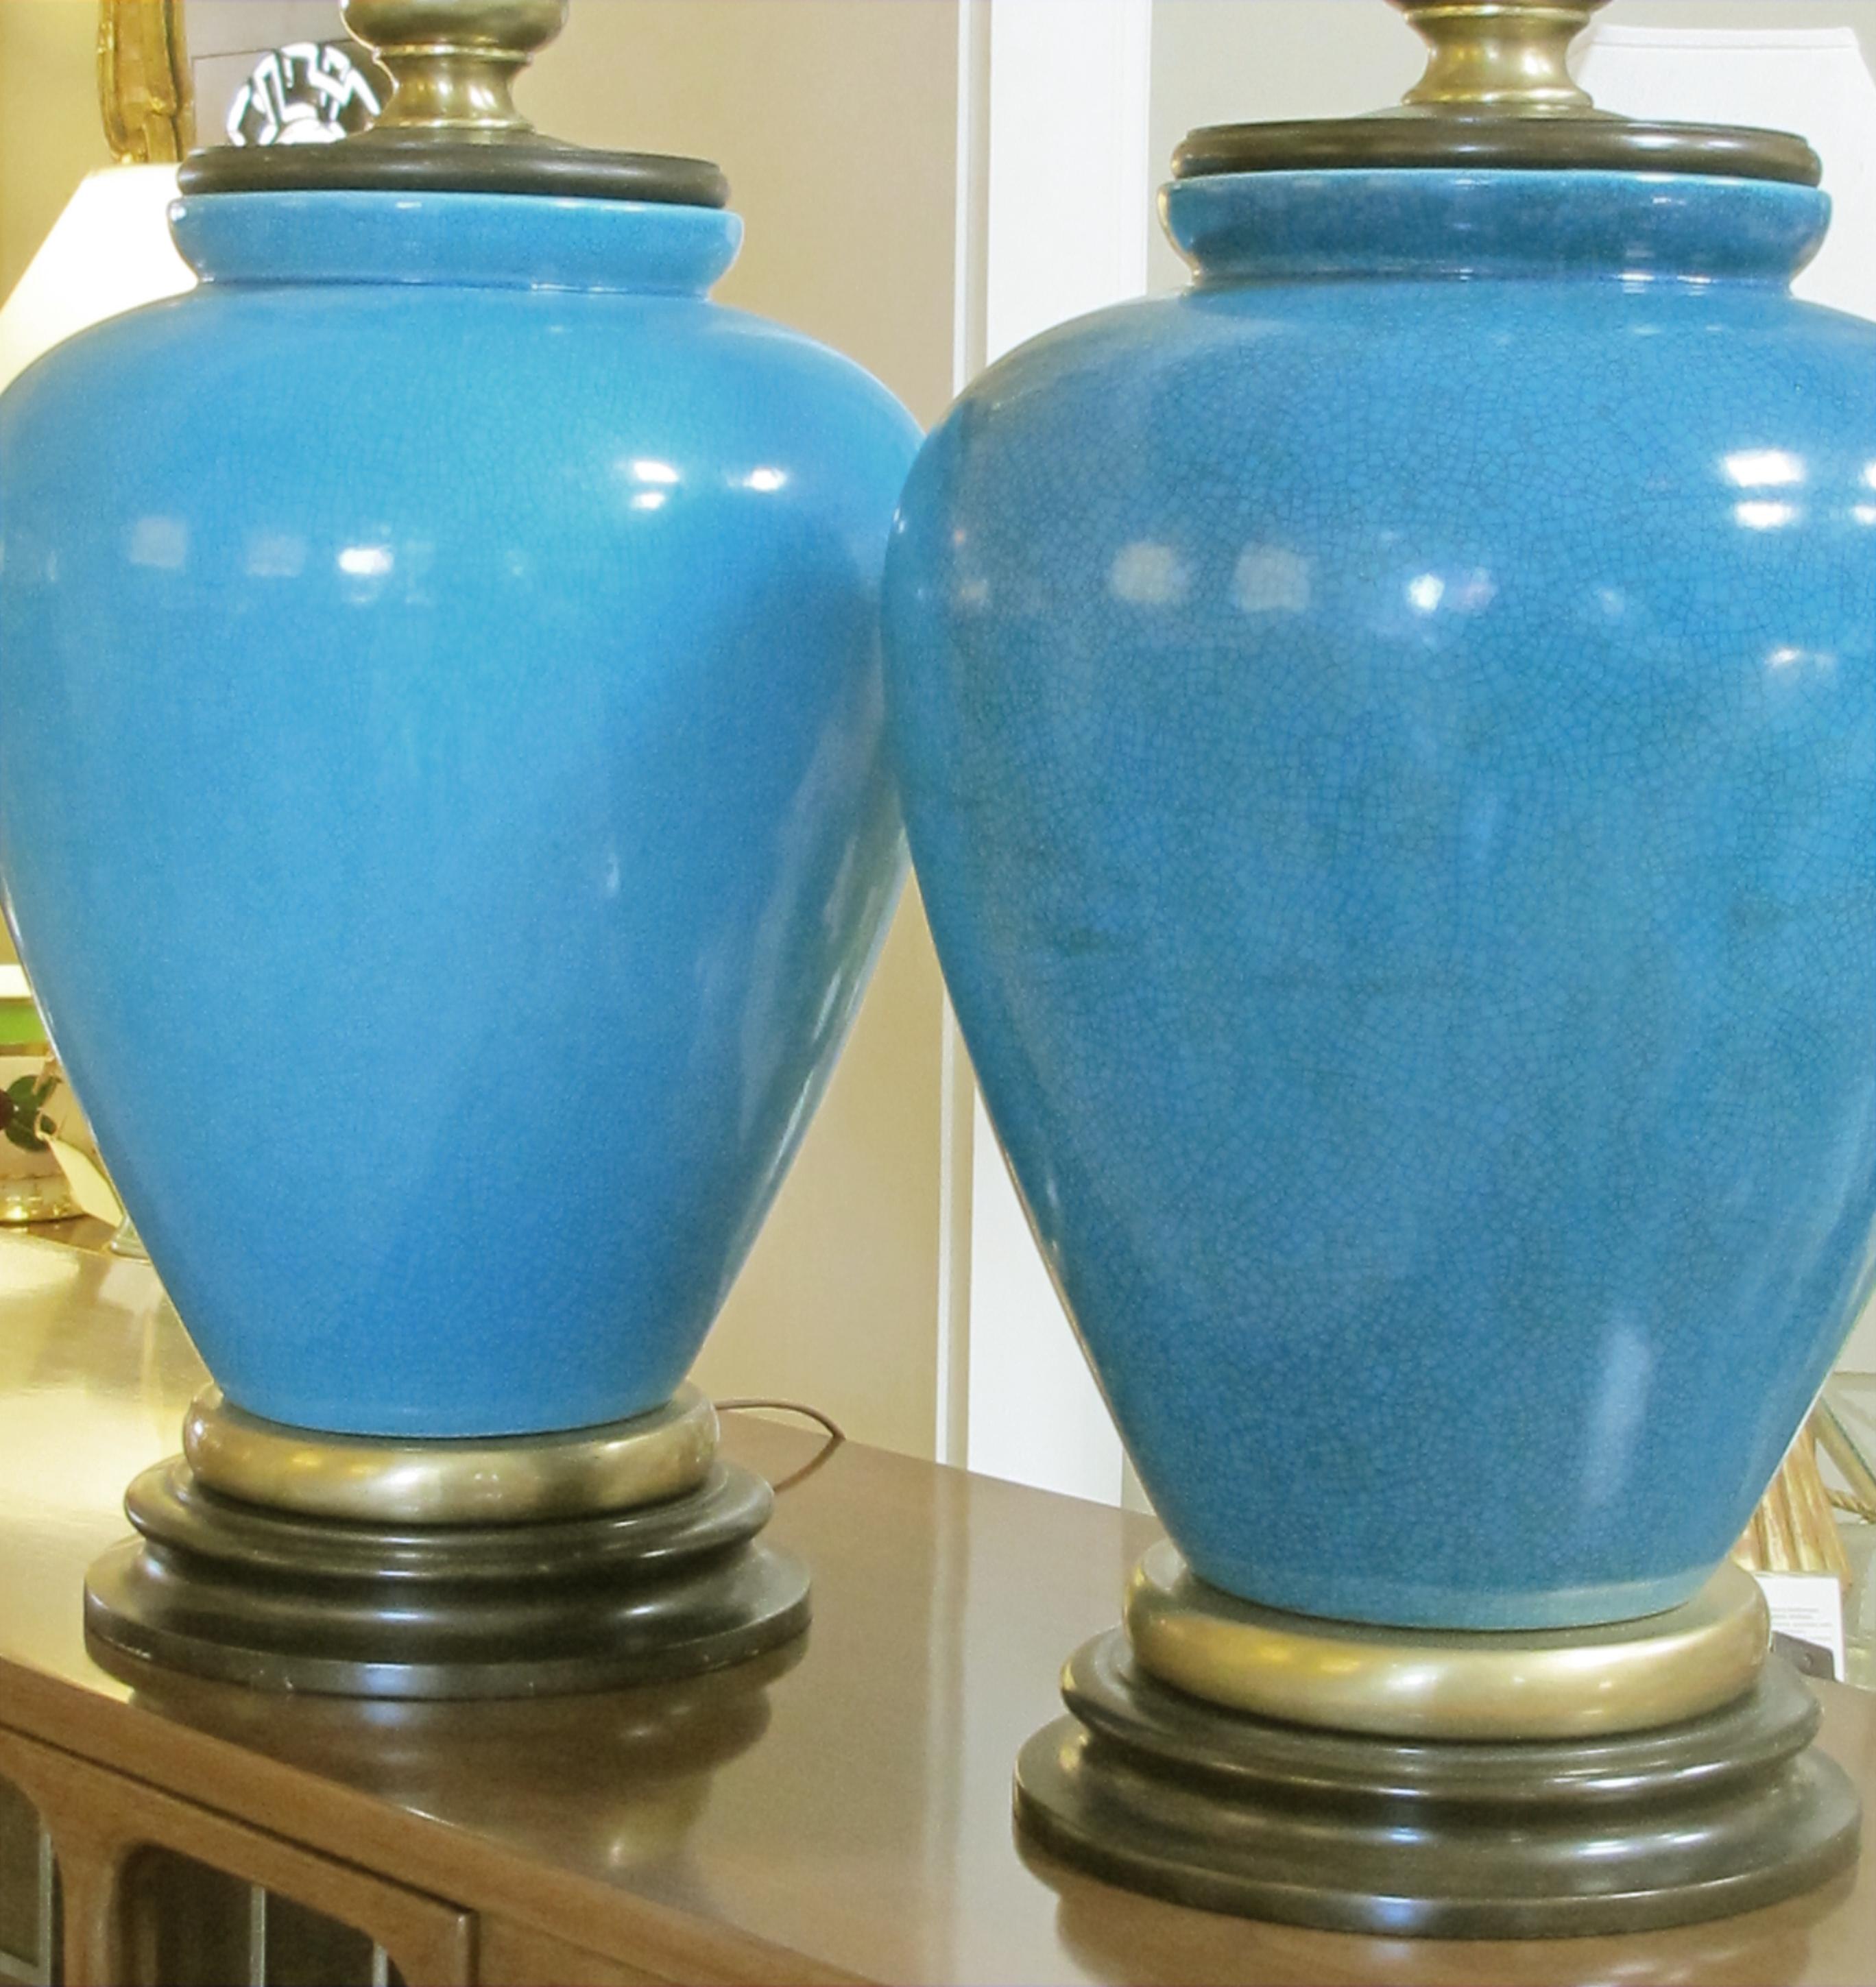 Striking American Turquoise Crackle-Glaze Ceramic Lamps, Frederick Cooper, Pair For Sale 3